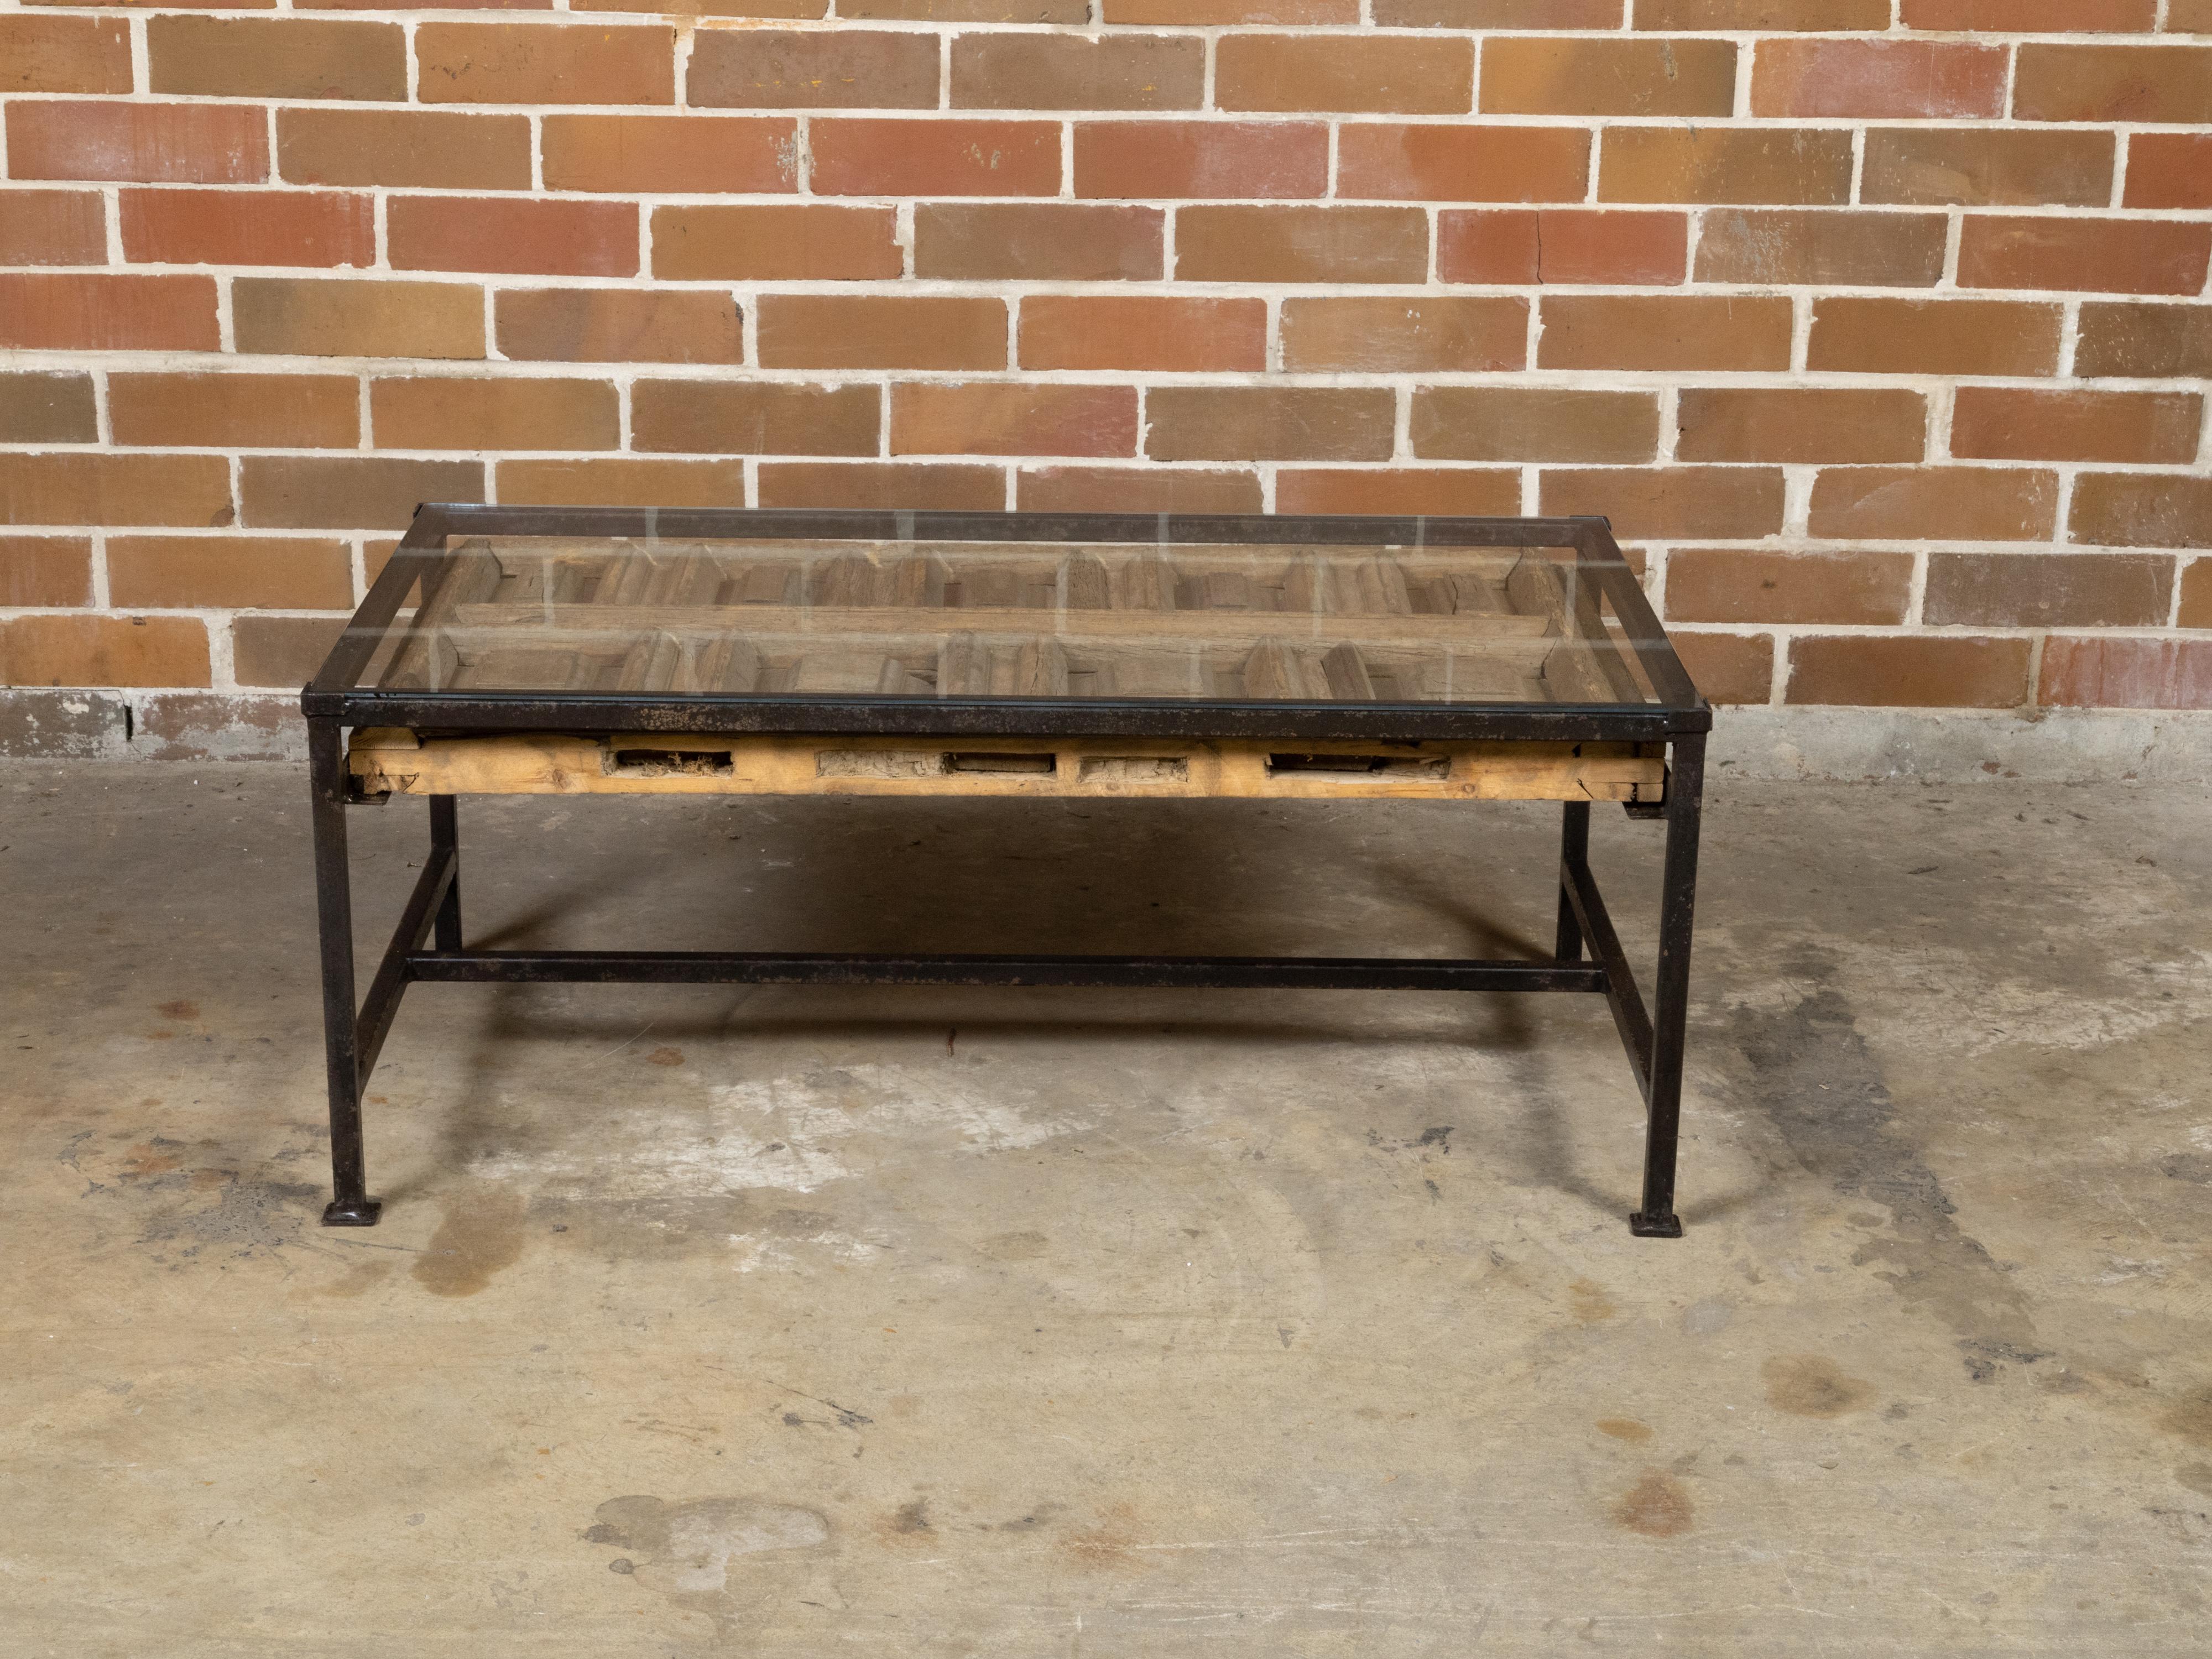 A contemporary coffee table made from an antique wooden fragment door with raised motifs under glass and mounted on a custom black iron base. Newly made in the USA, this coffee table features a beautifully rustic rectangular top made from an antique